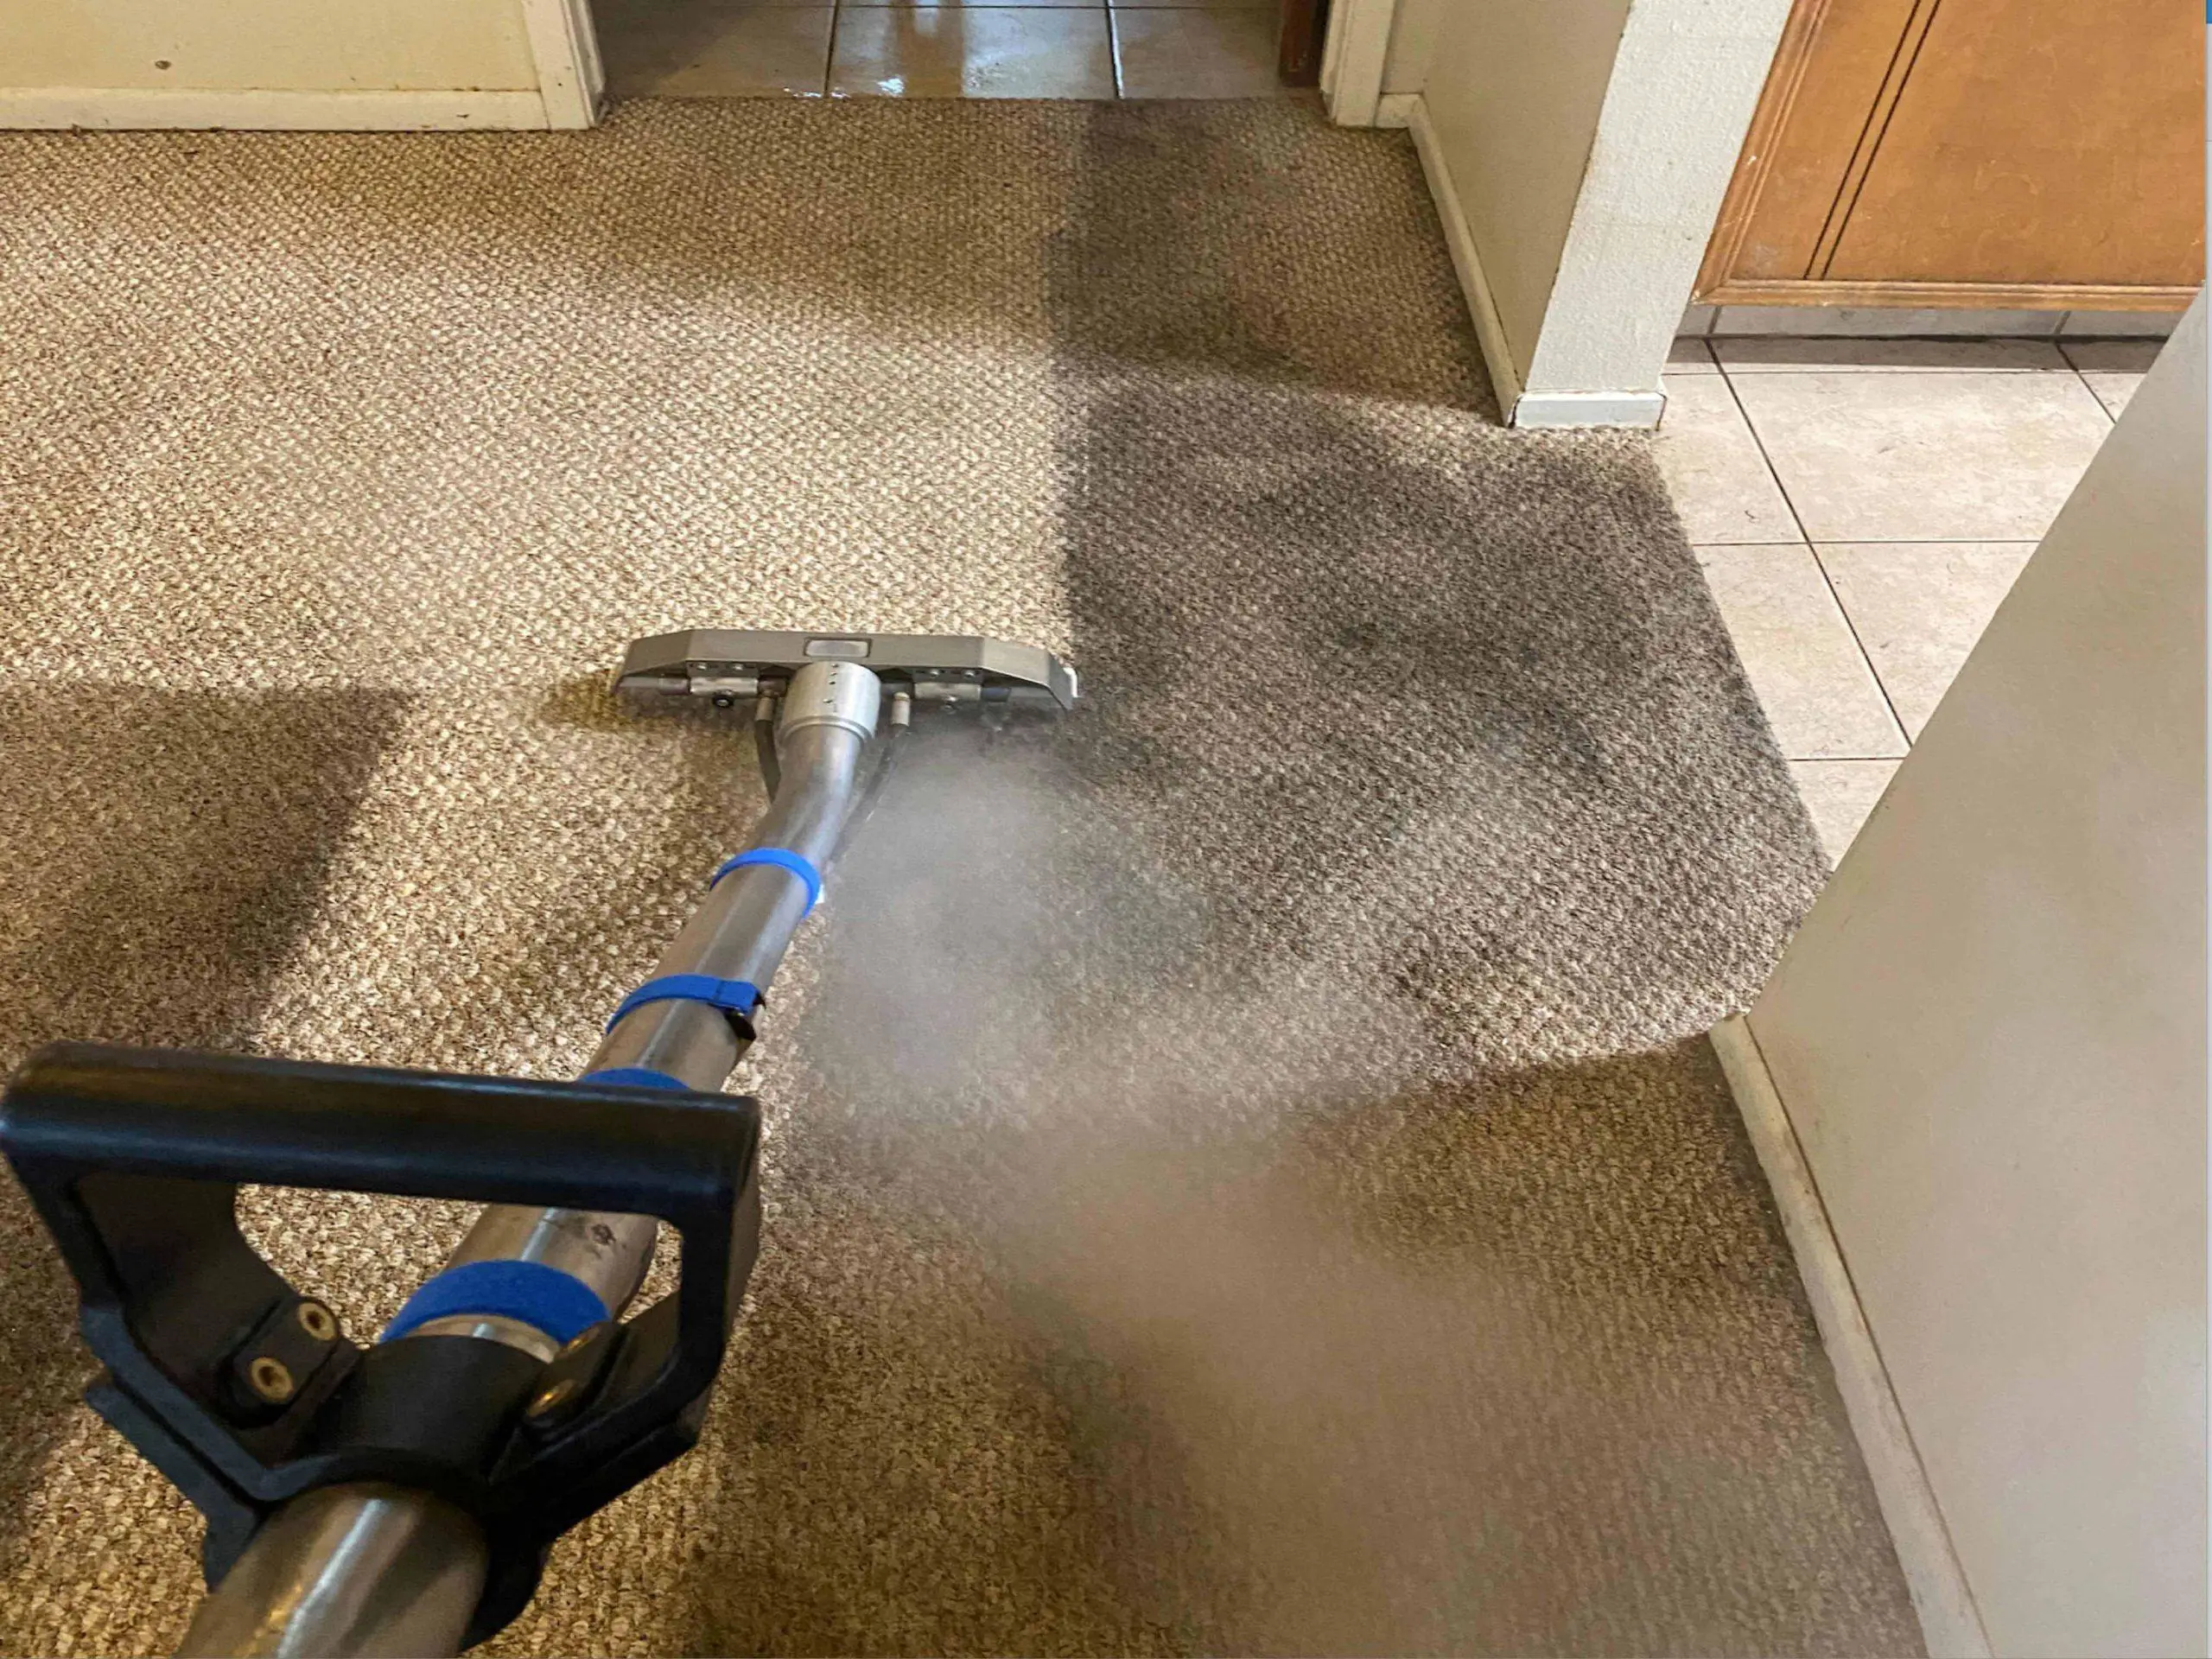 How to dry your wet carpet: easy and fast ways